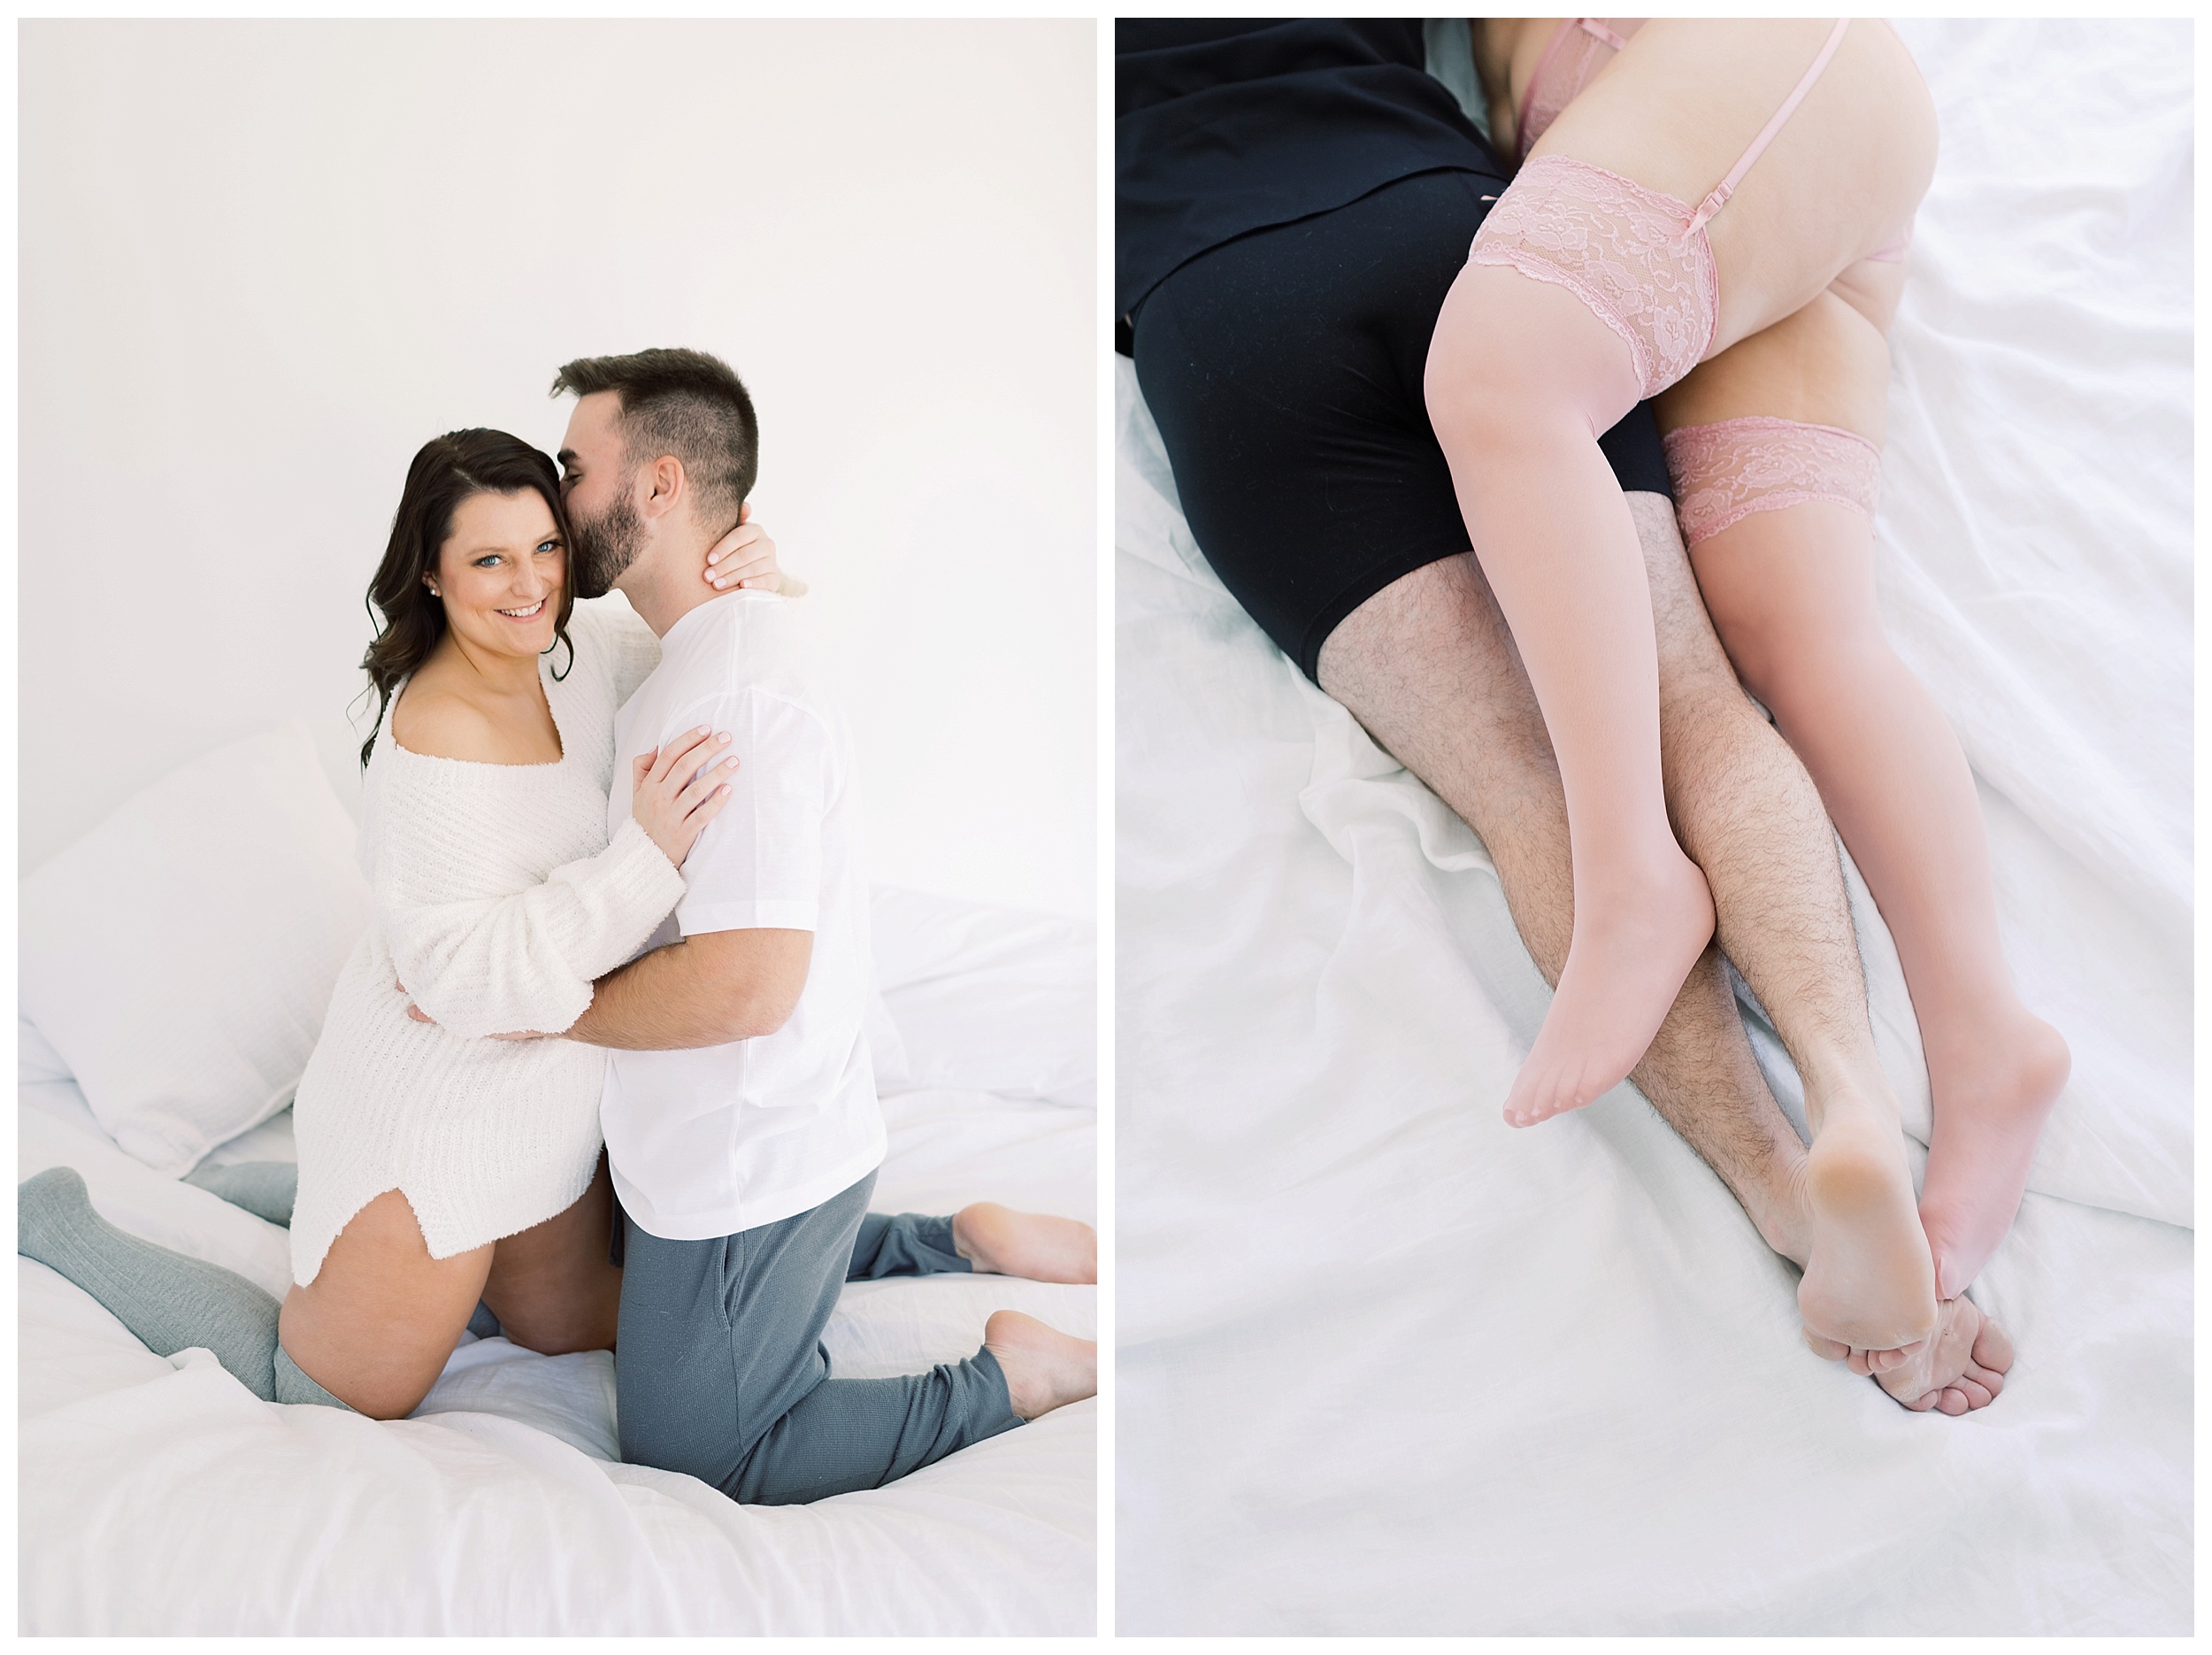 Below are my favorite Safe For Work snaps of their couple’s boudoir session...